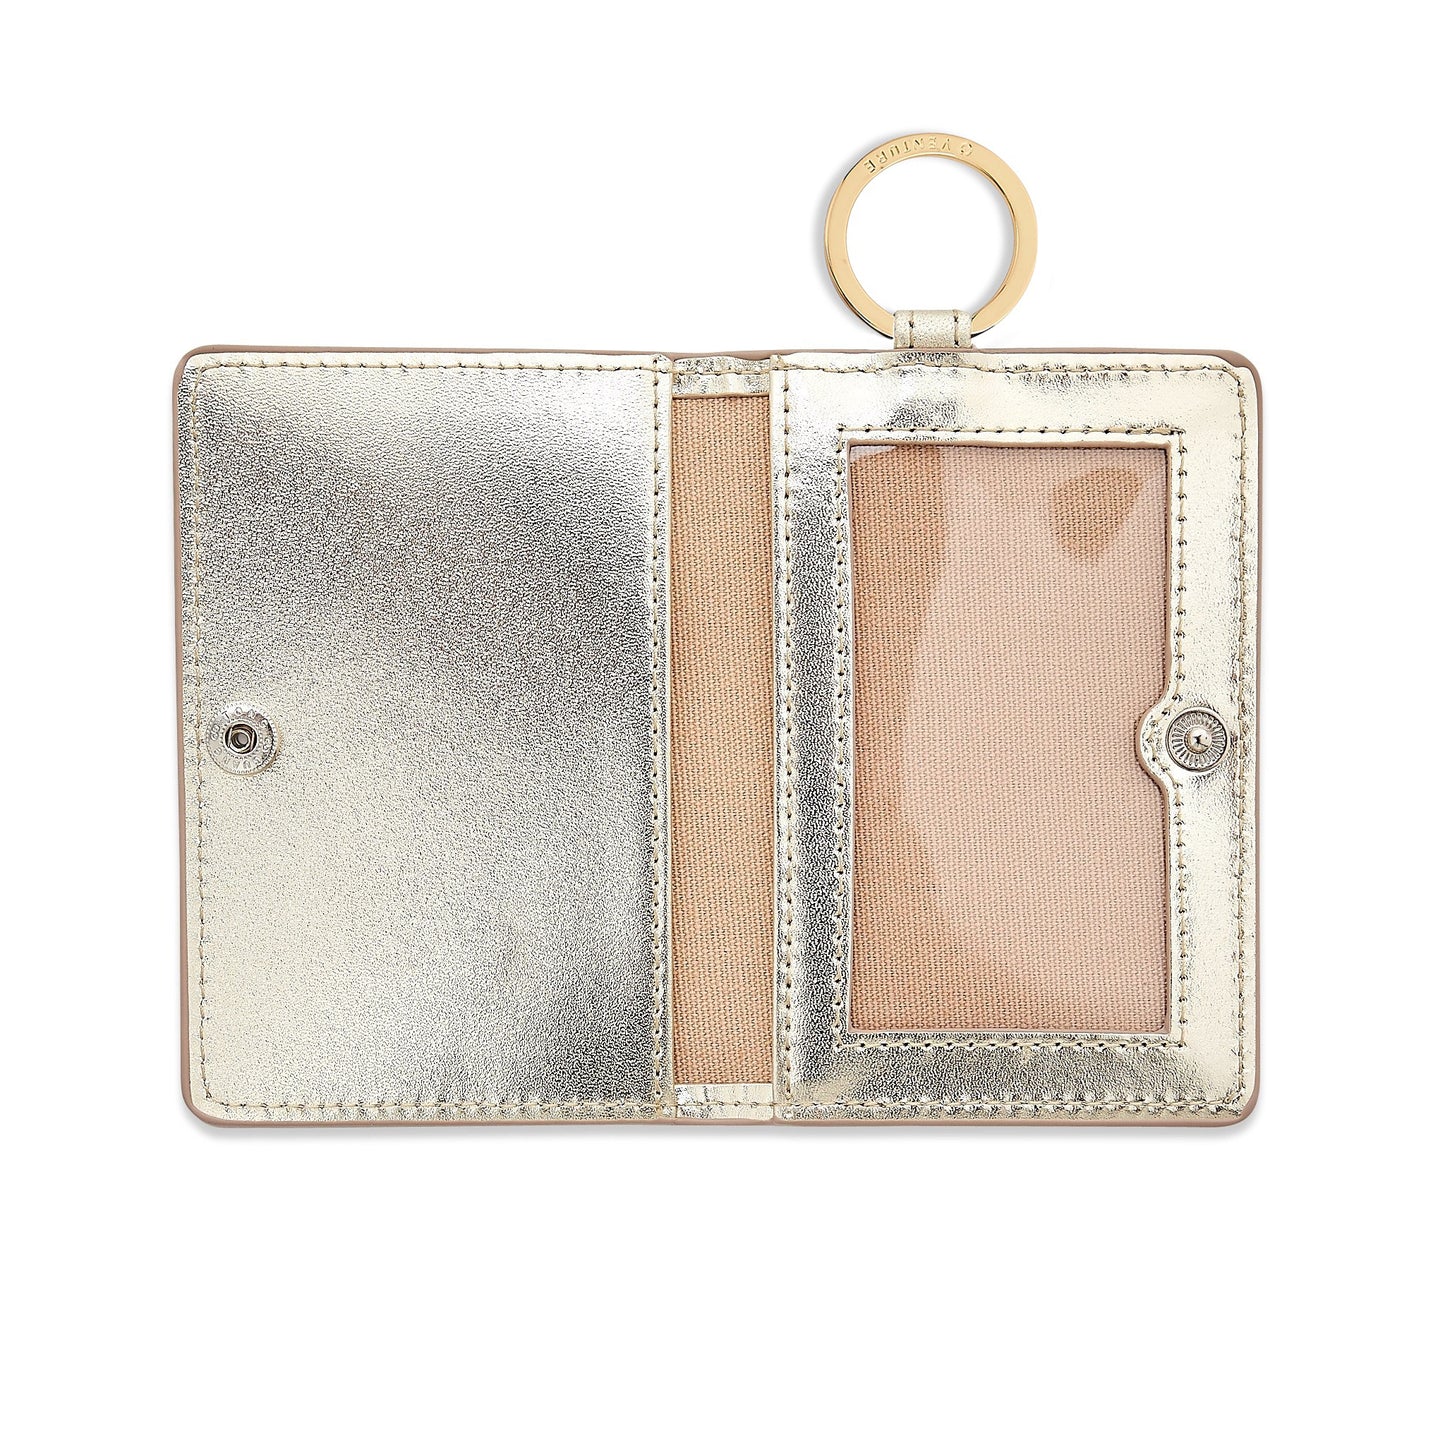 Gold leather bifold Keychain Wallet with compartments shown open.